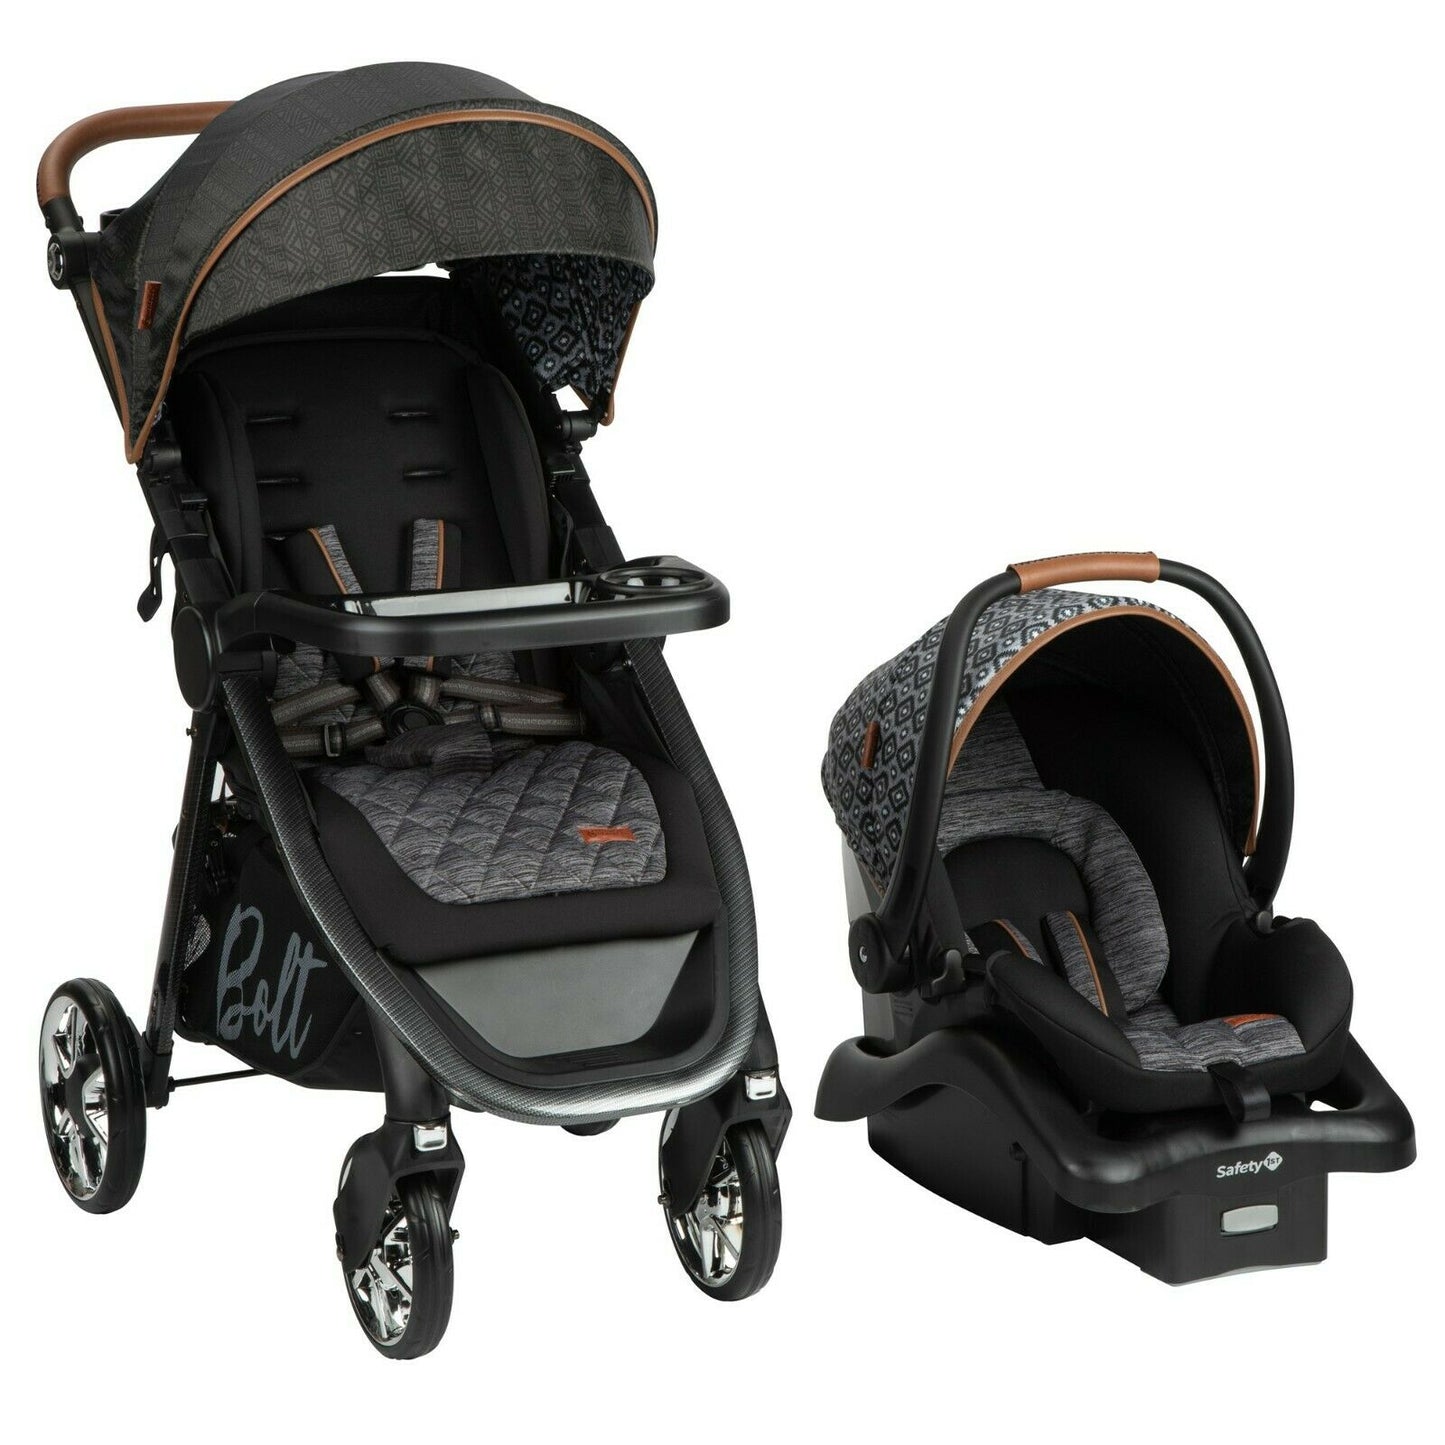 Baby Stroller Travel System with Car Seat Infant Playard Crib Combo Set-Black